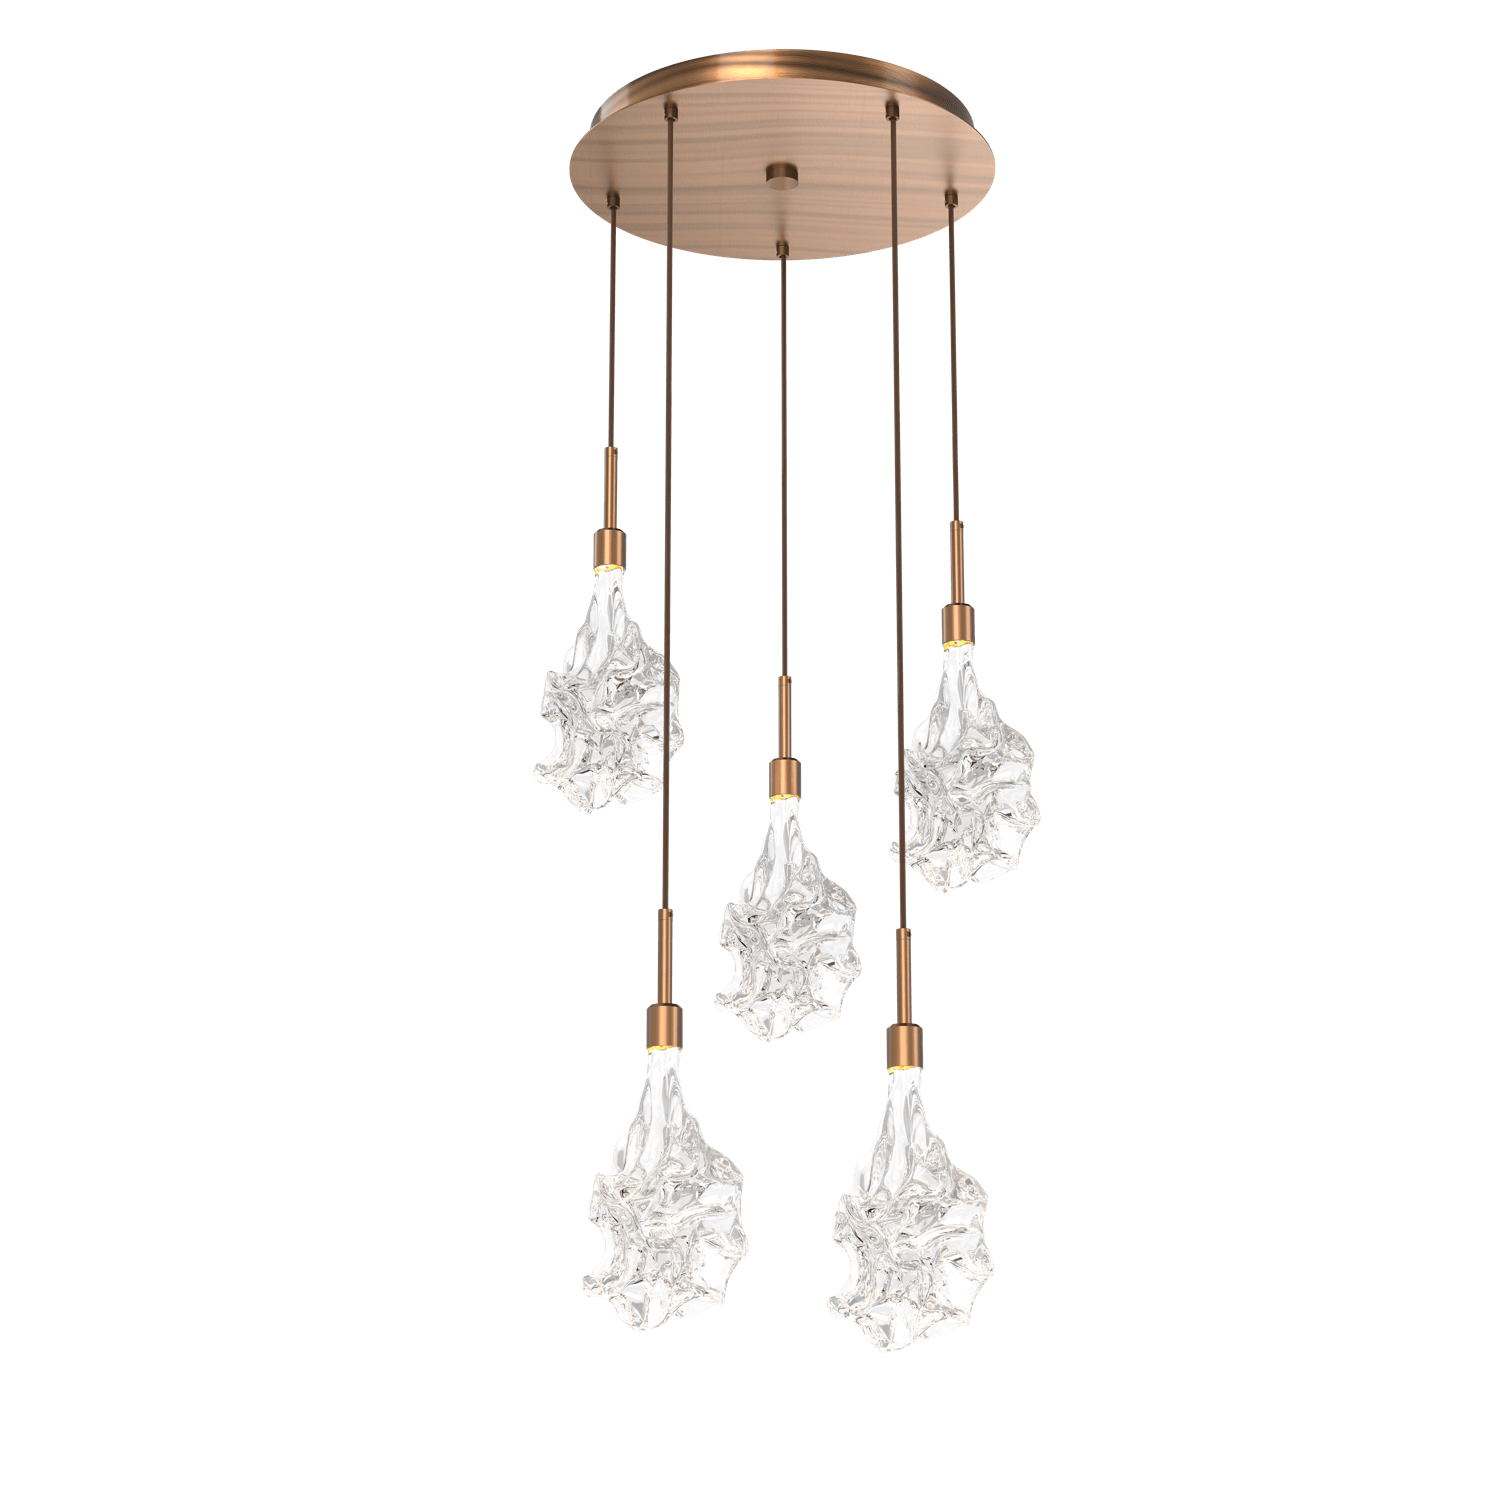 CHB0059-05-RB-Hammerton-Studio-Blossom-5-light-round-pendant-chandelier-with-oil-rubbed-bronze-finish-and-clear-handblown-crystal-glass-shades-and-LED-lamping